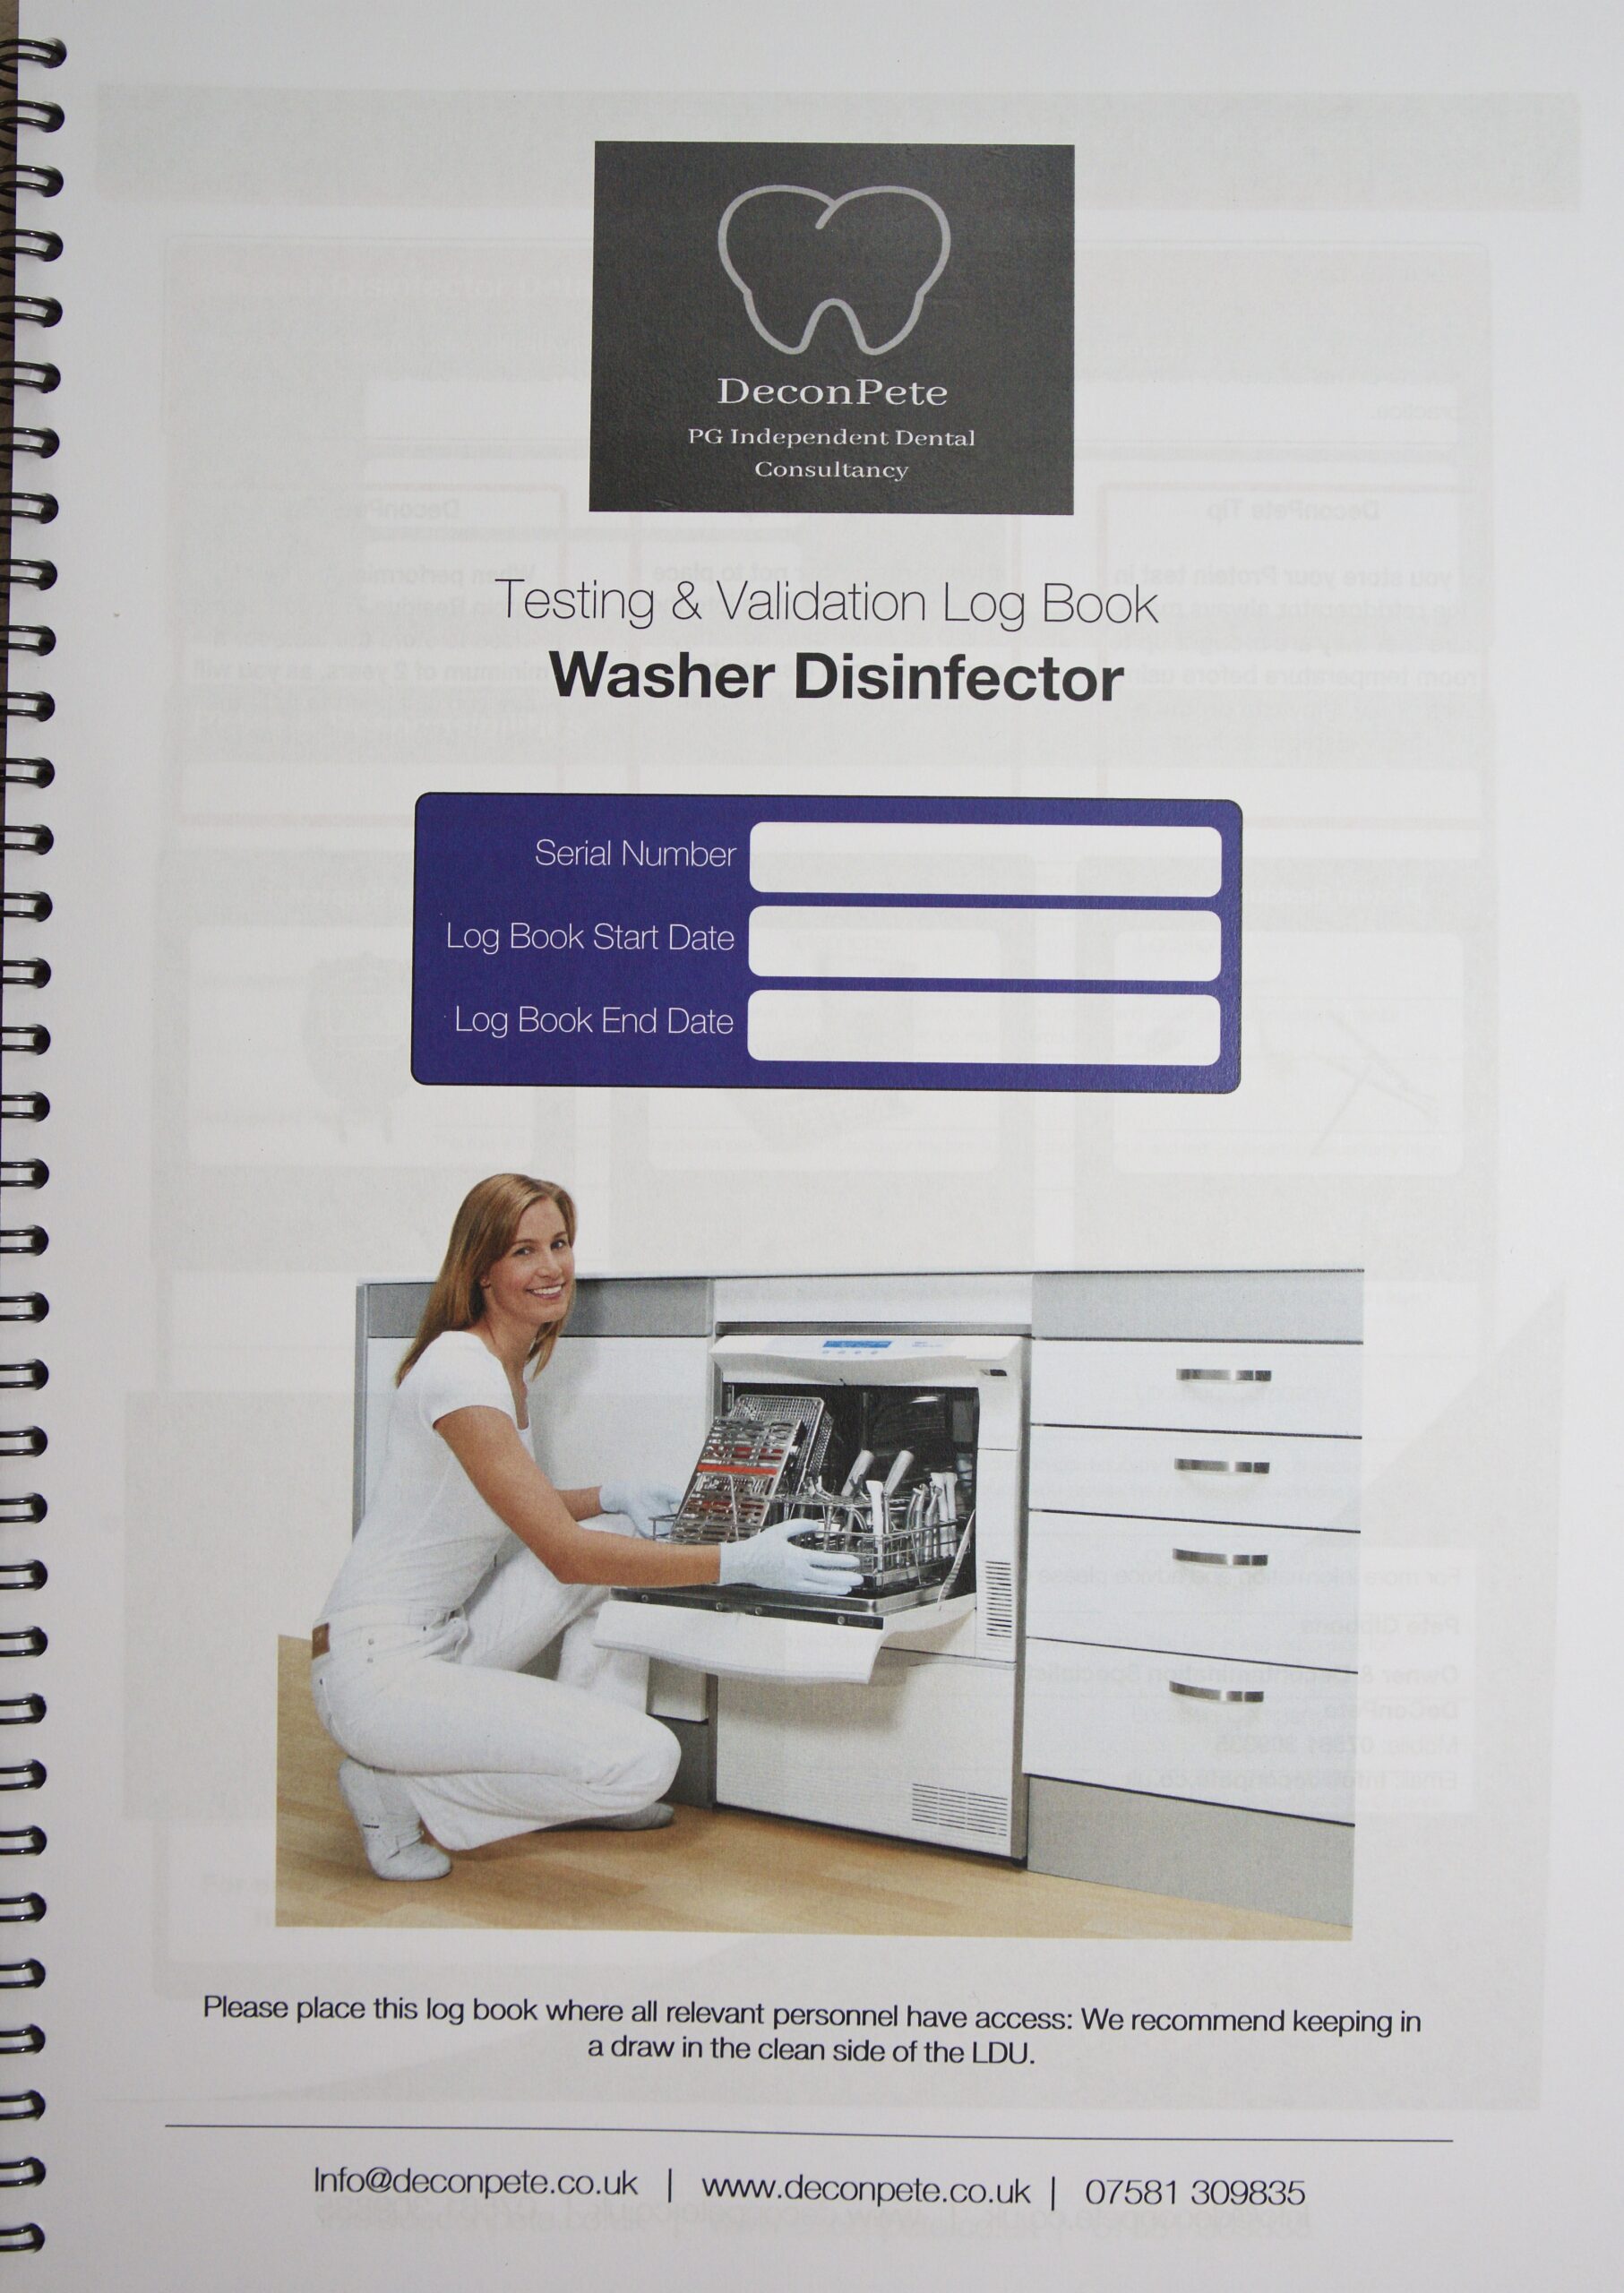 Decontamination Compliance Book - Washer Disinfector